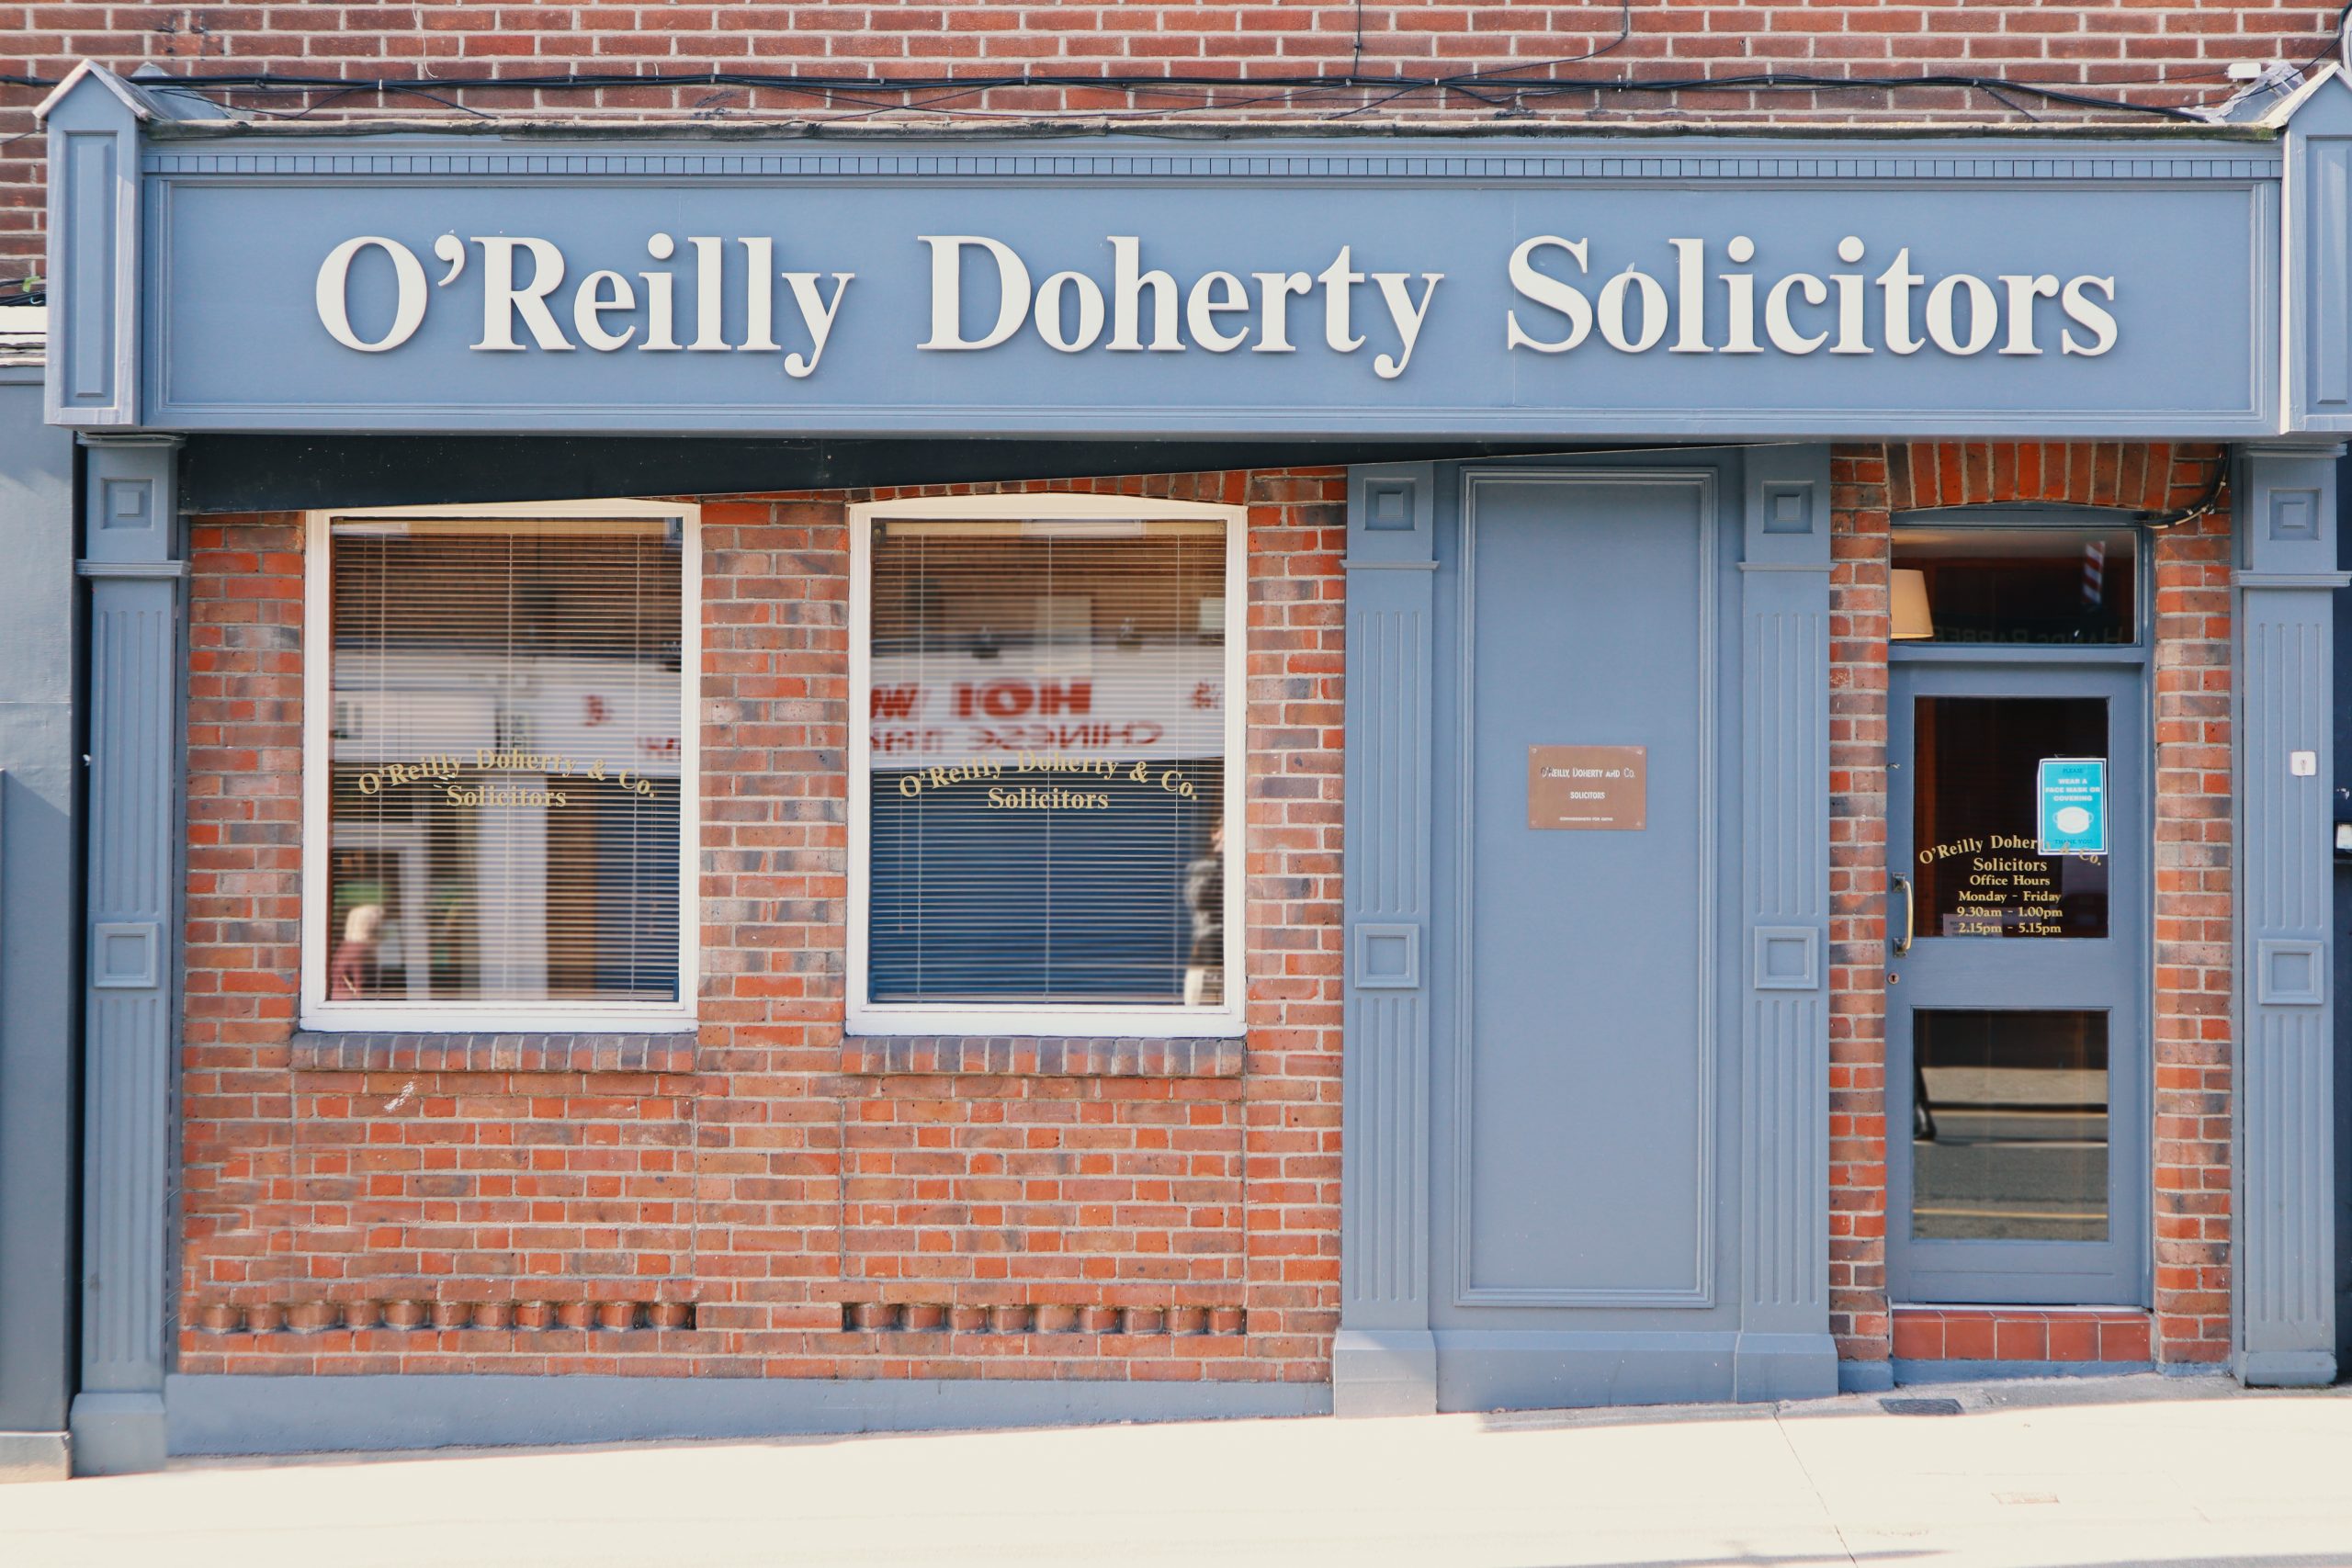 O'Reilly Doherty solicitors